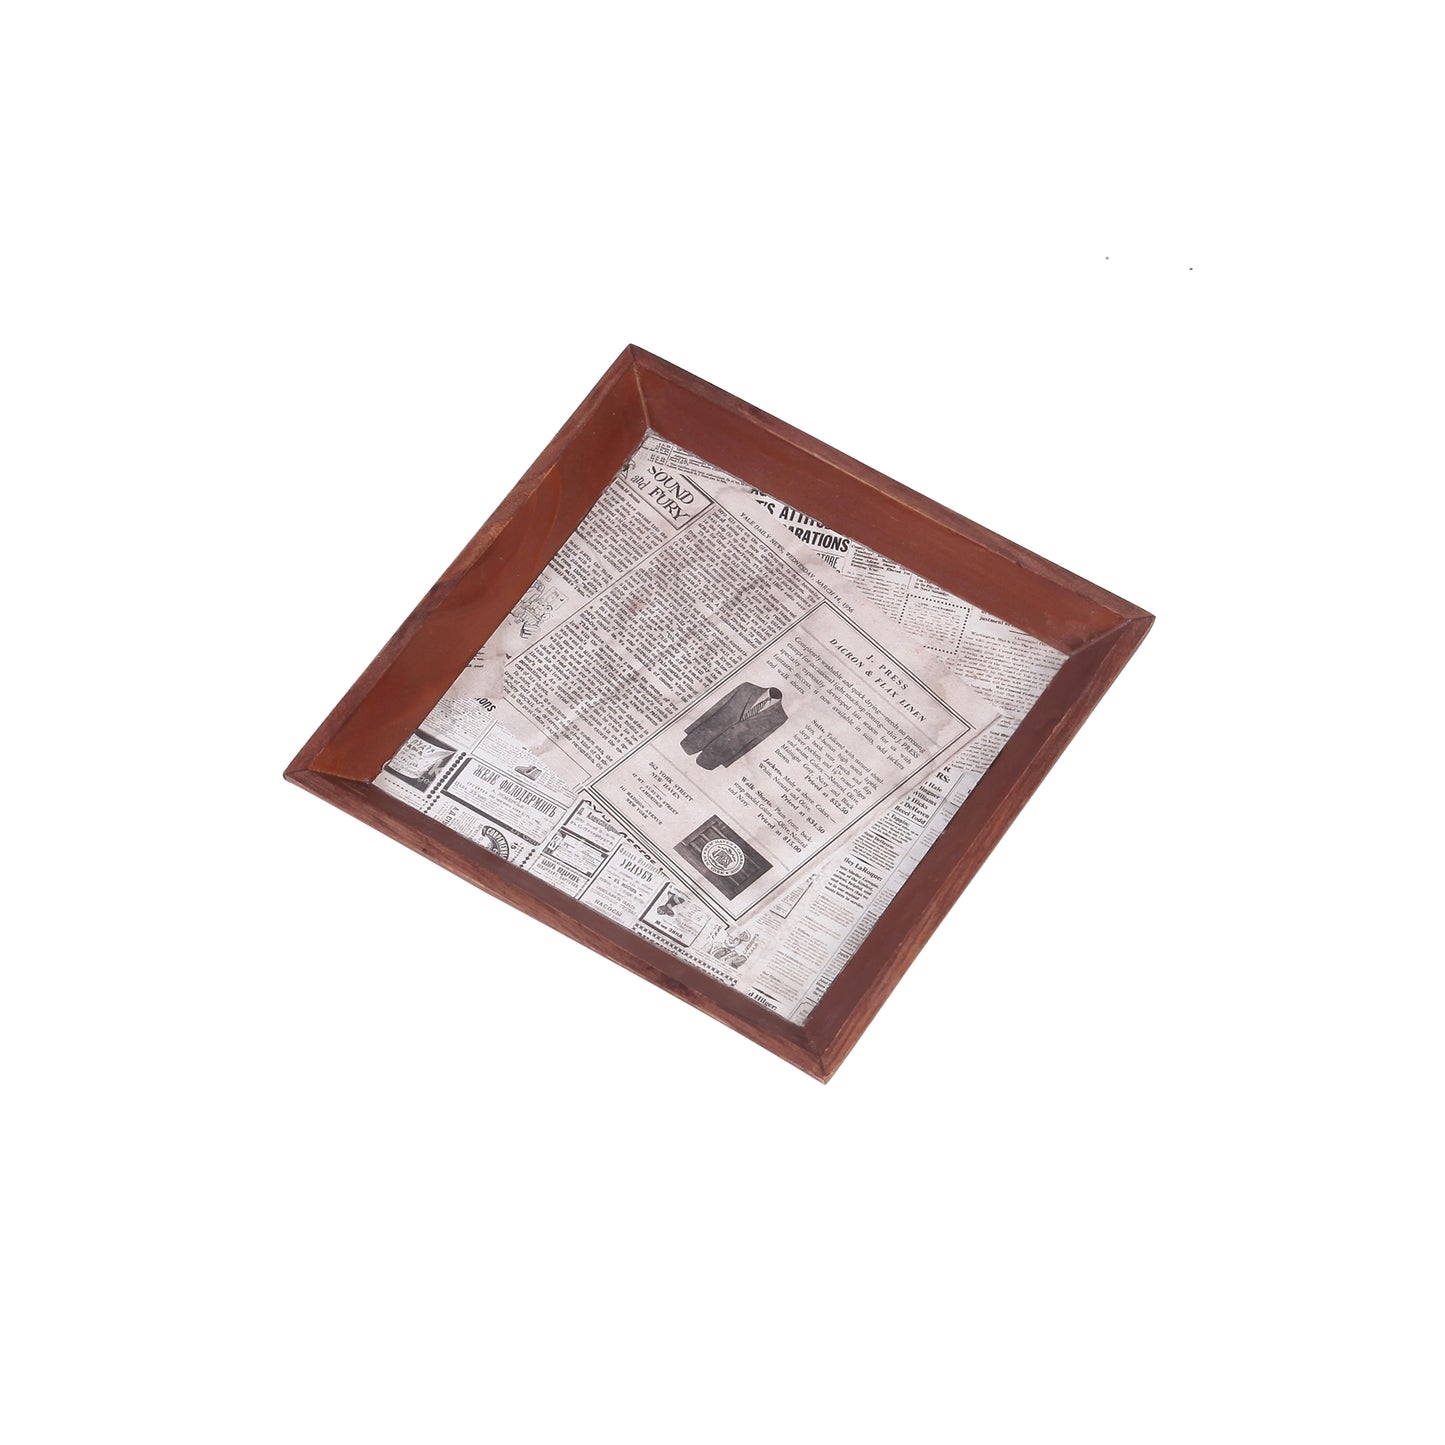 A Tiny Mistake Vintage Newspaper Small Square Wooden Serving Tray, 18 x 18 x 2 cm